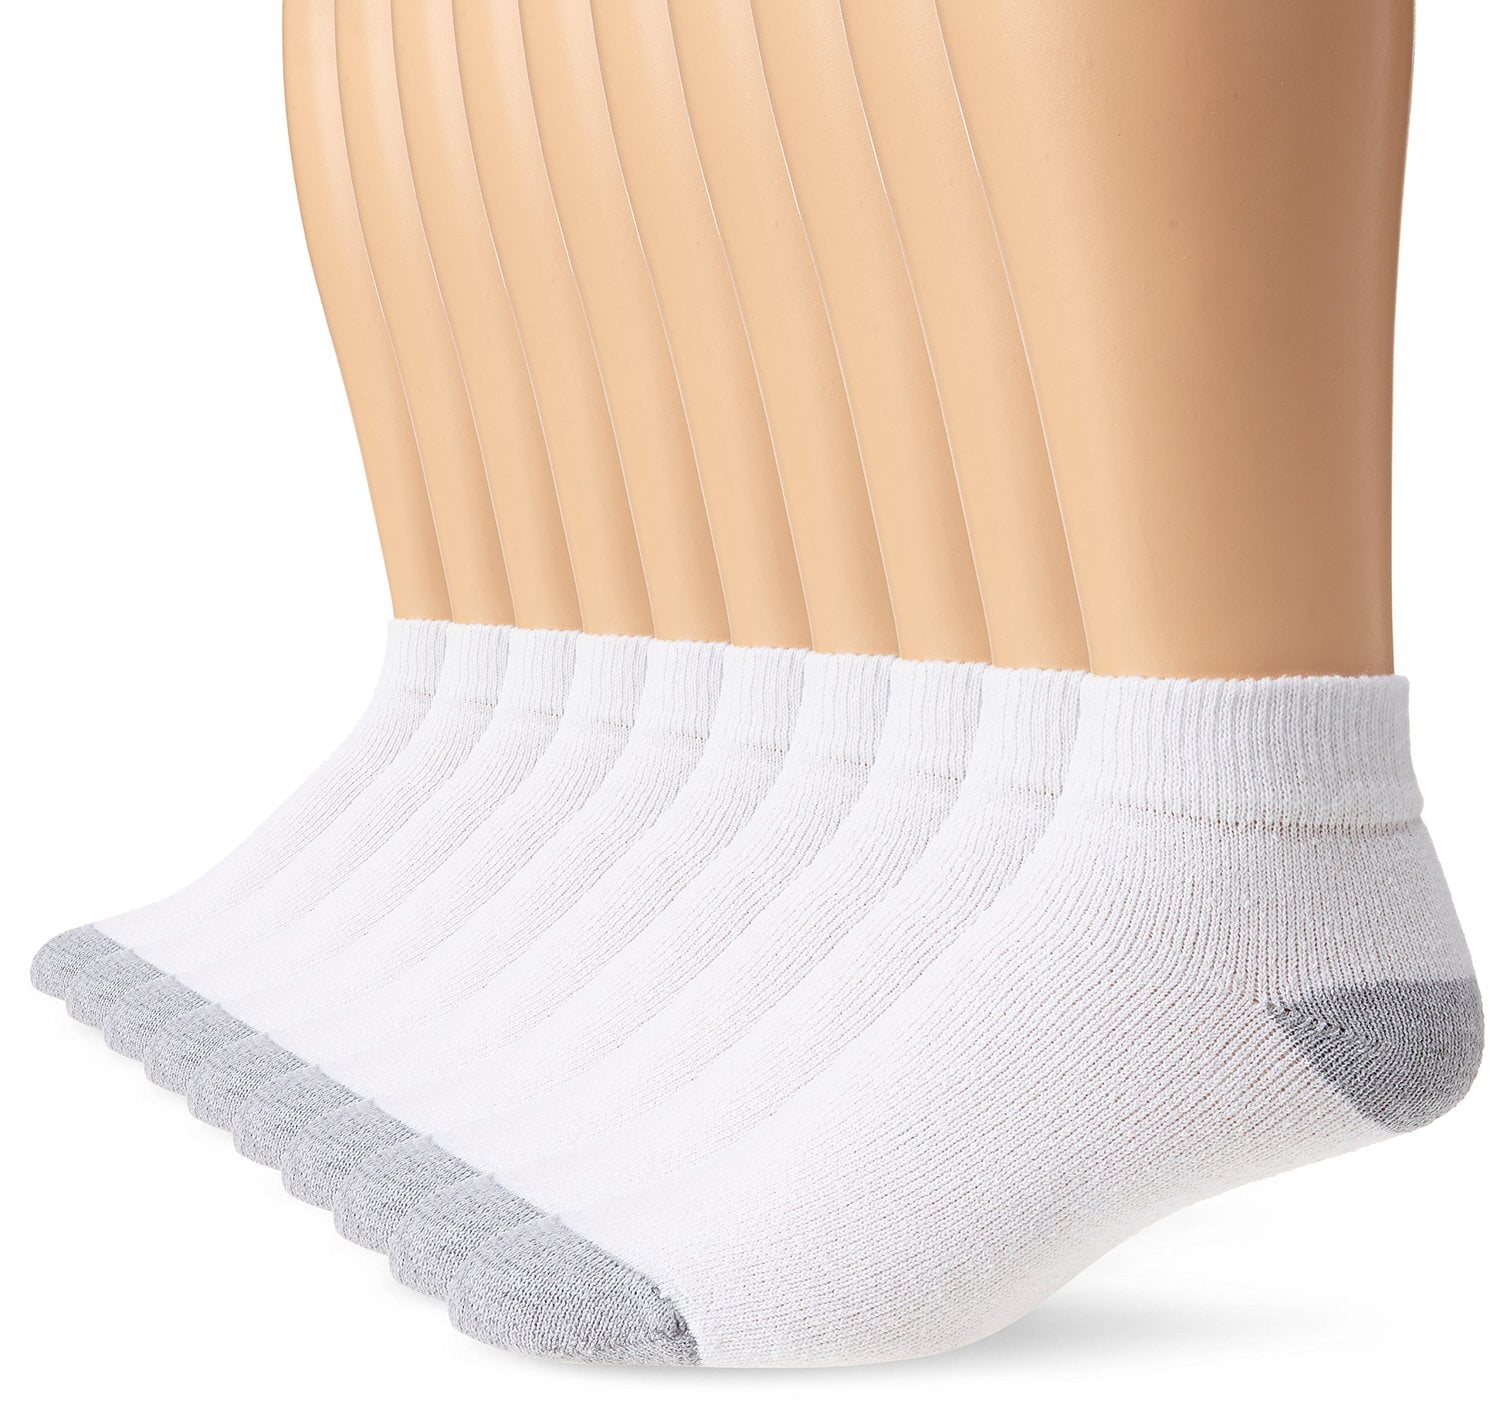 Fruit of the Loom Men's Comfortable Ankle Sock 12 Pack Size 6-12 